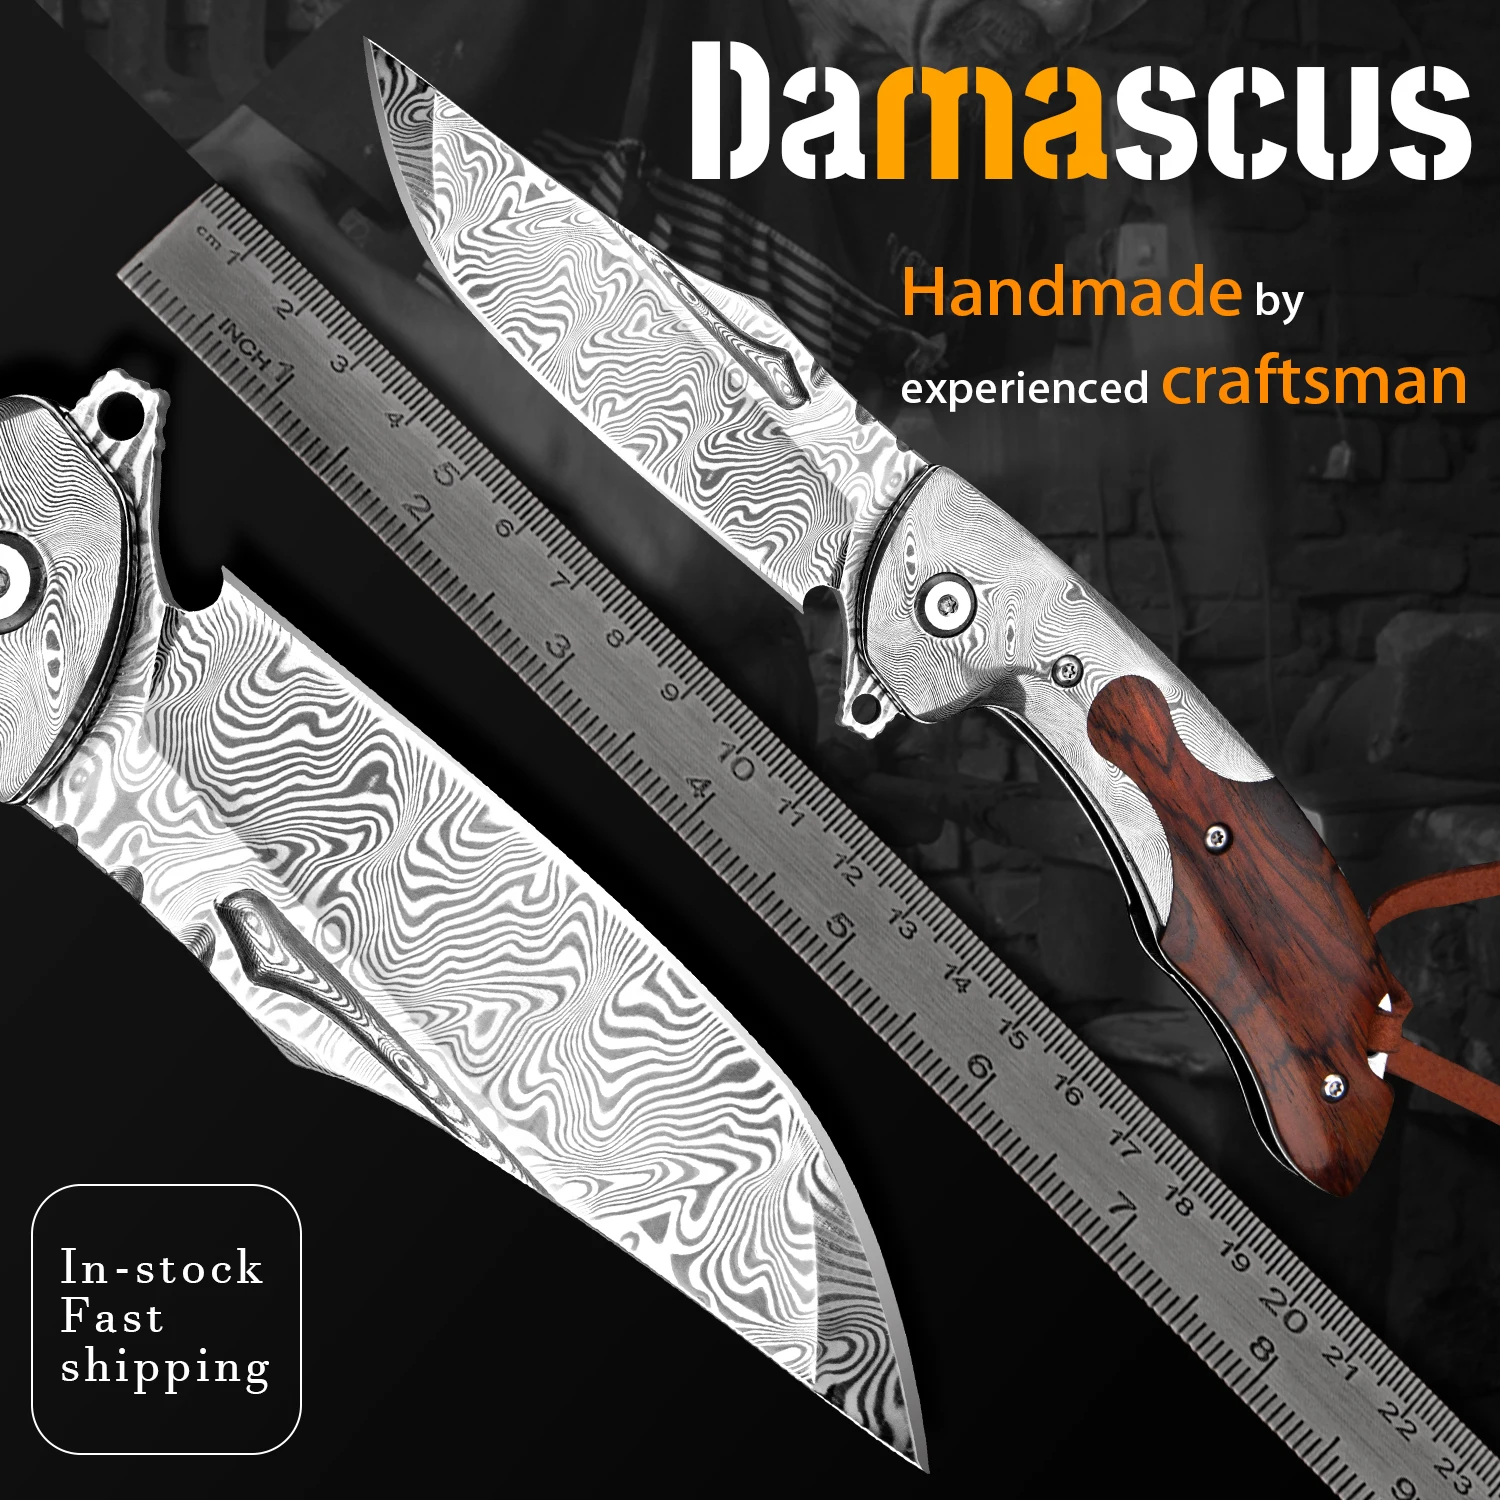 Handmade Damascus Folding Knife with Leather Sheath EDC Camping Tools for Outdoor Activities Self Defense Collection Men's Gift